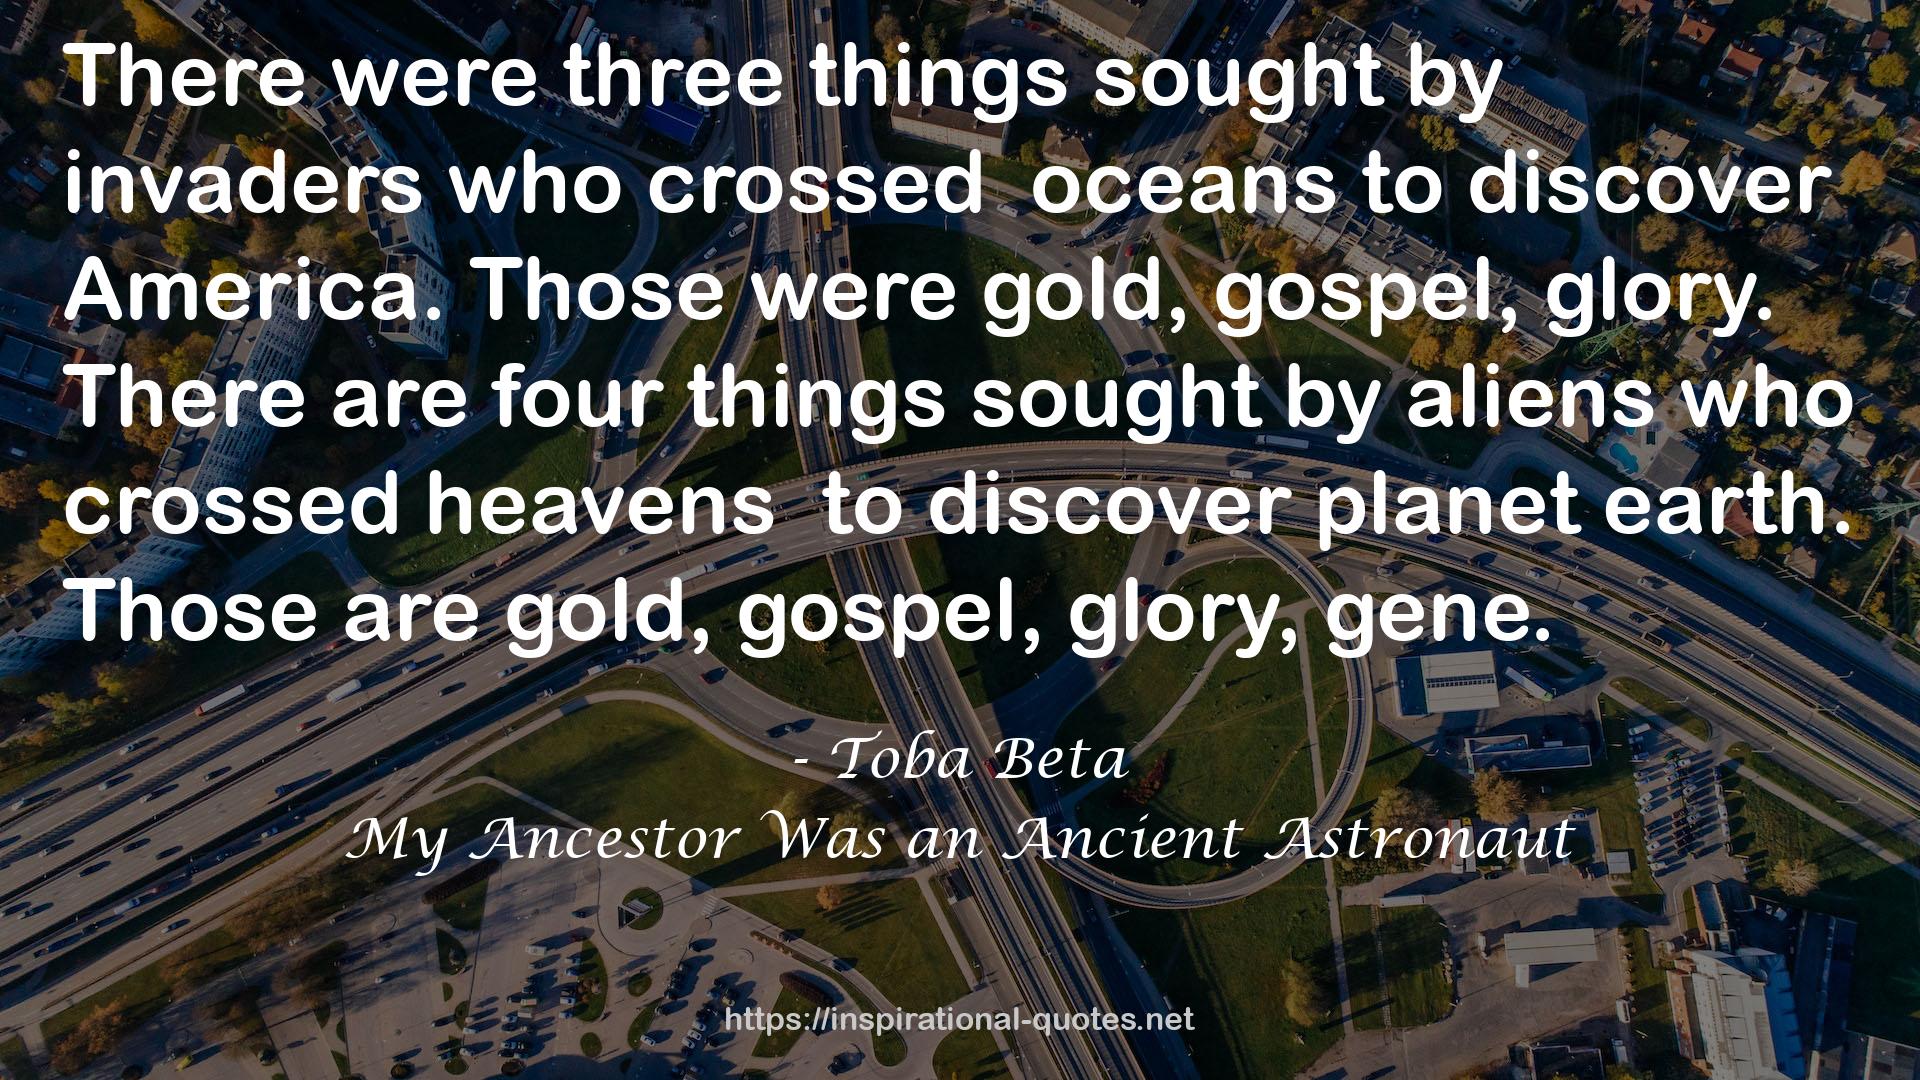 My Ancestor Was an Ancient Astronaut QUOTES